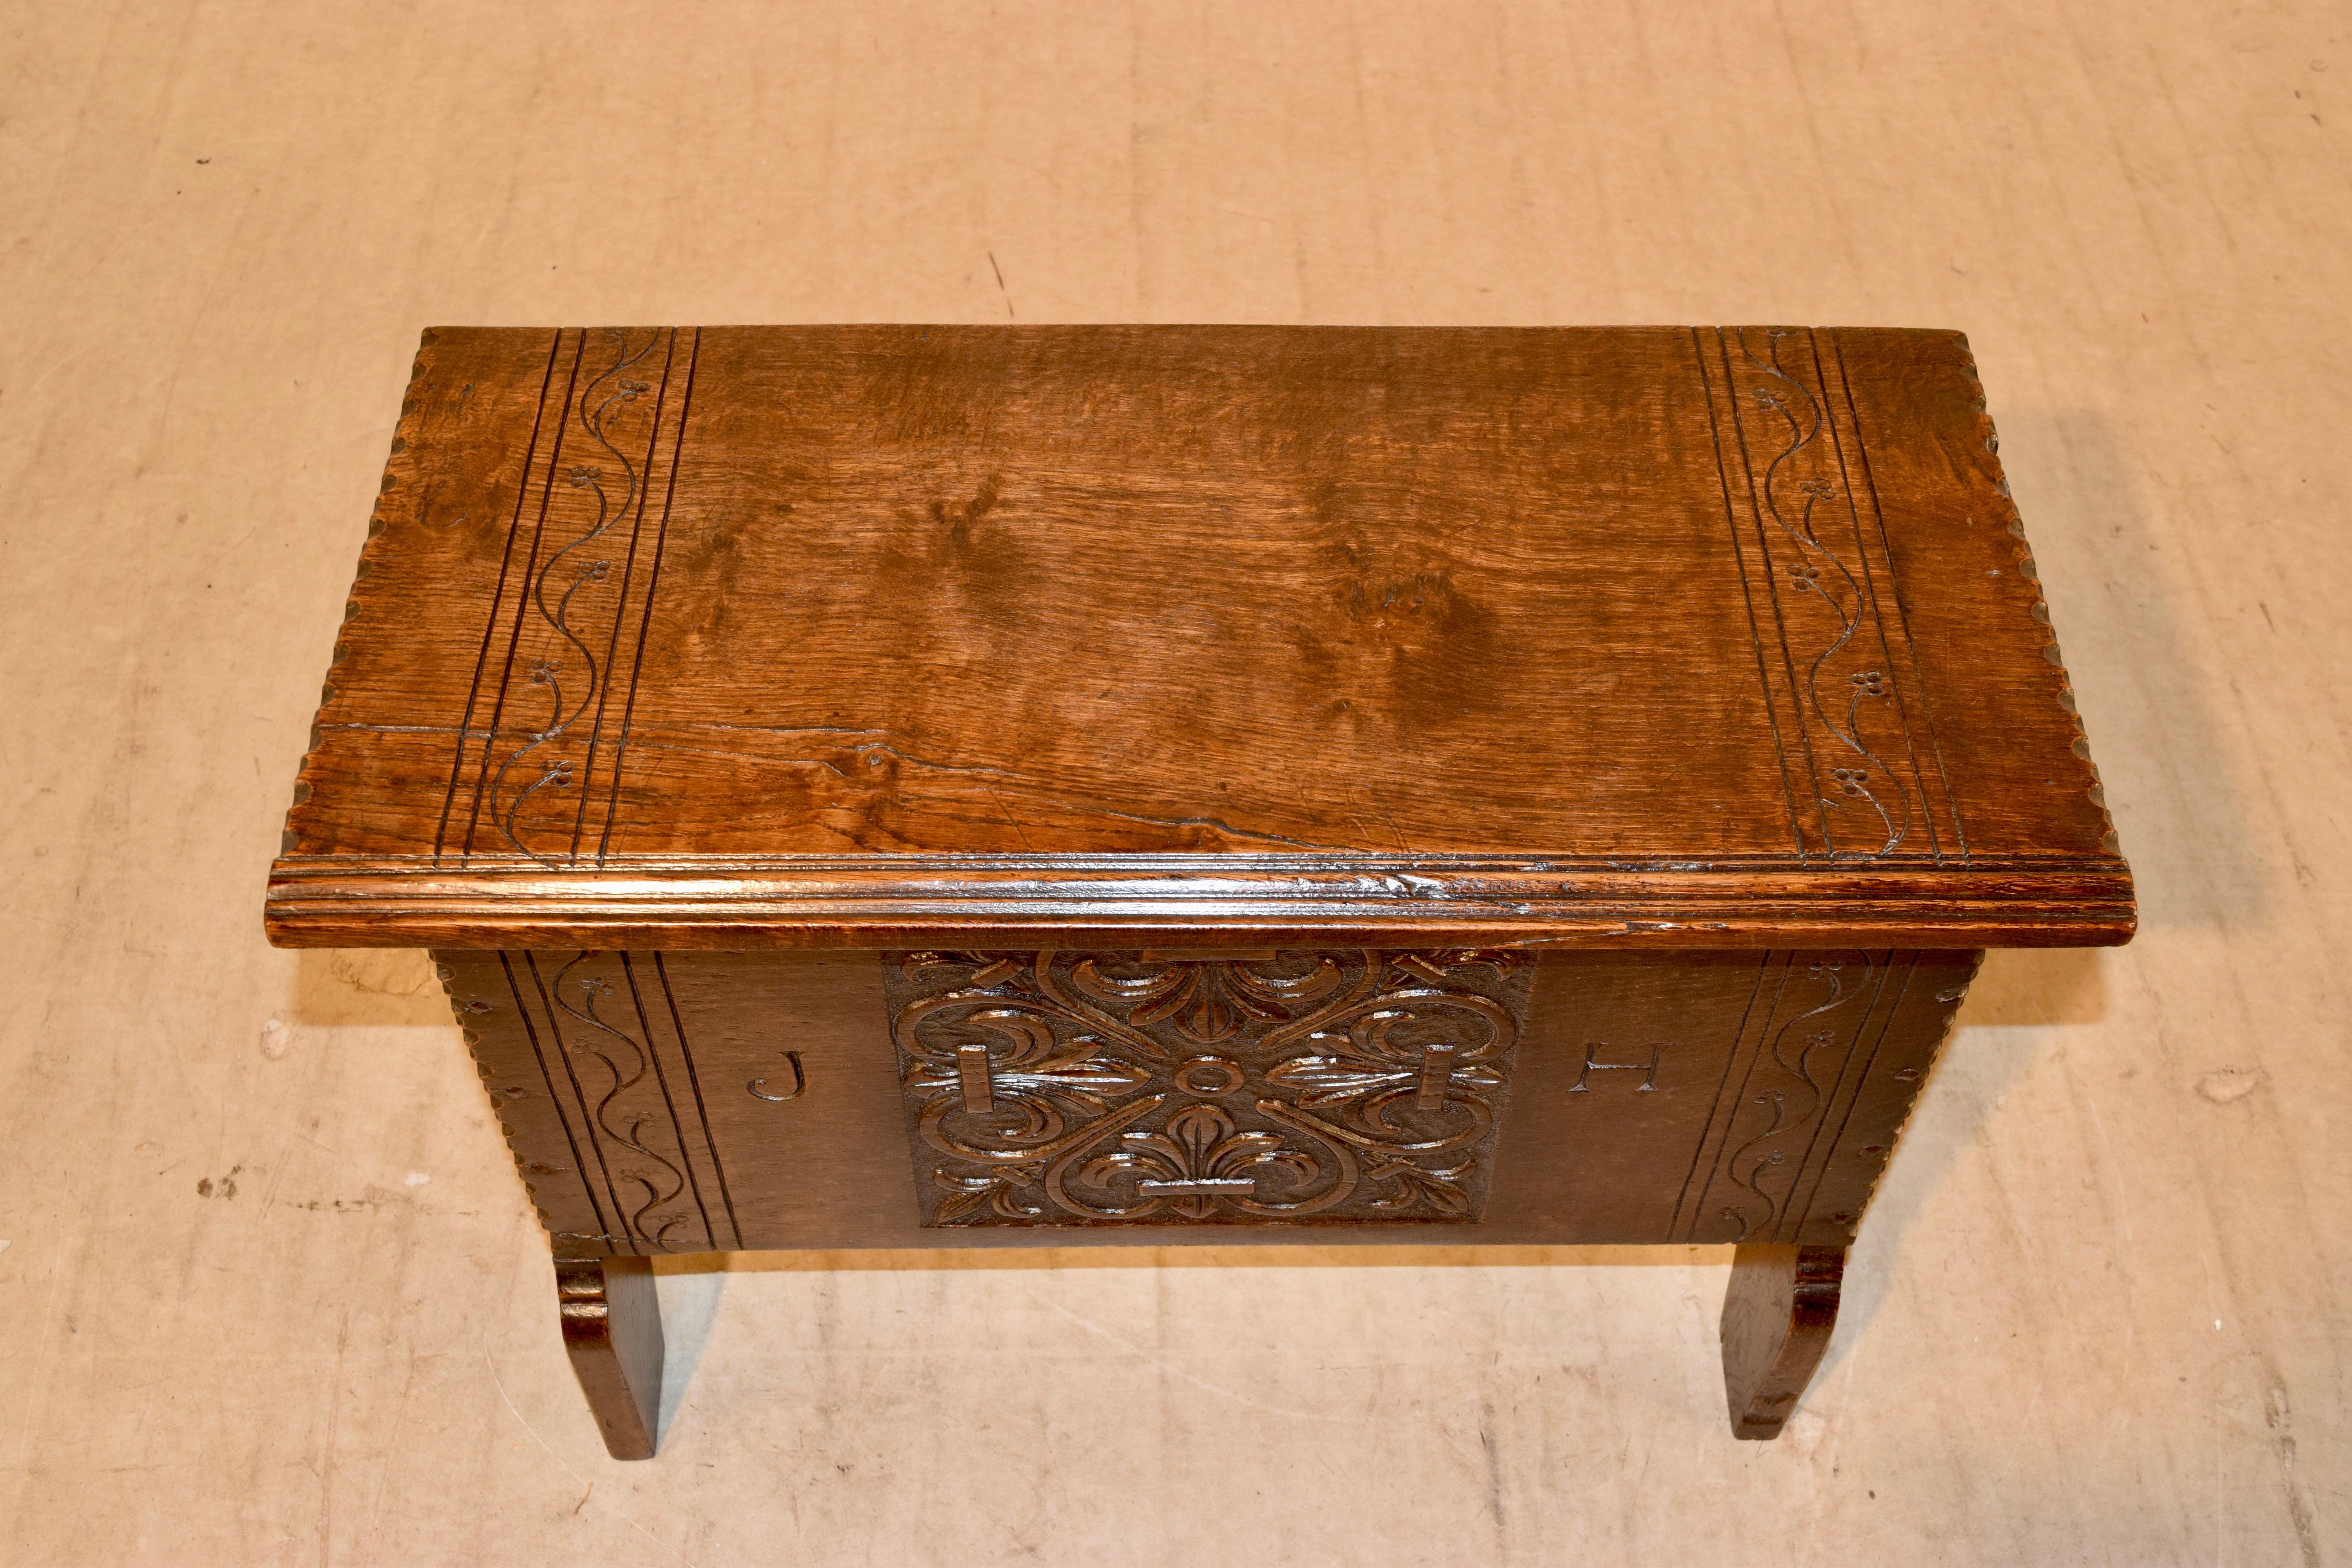 Hand-Carved 19th Century Lift Top Stool